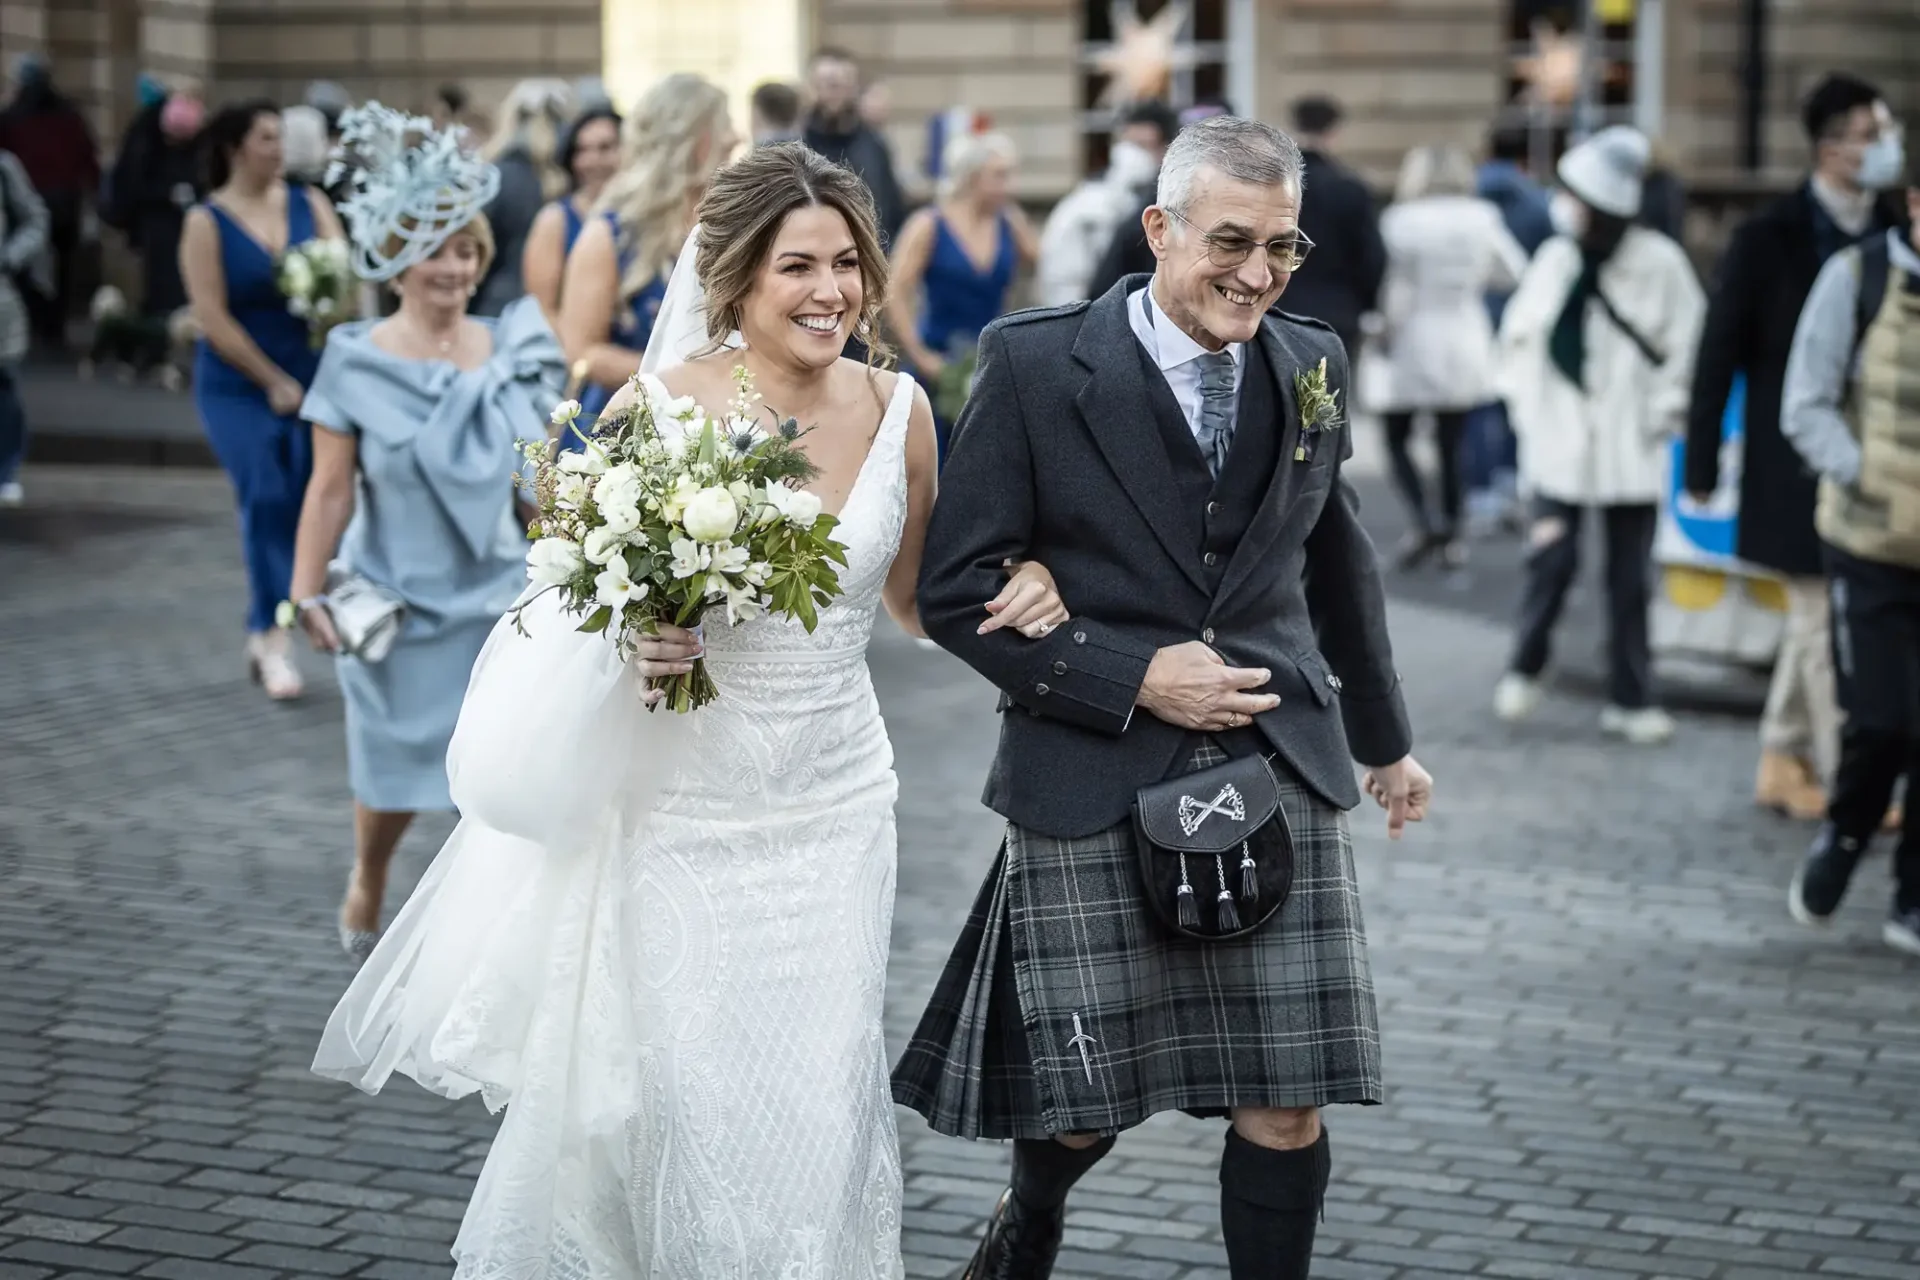 A bride in a white dress and a groom in a kilt and jacket, smiling and walking together on a city street with onlookers in the background.